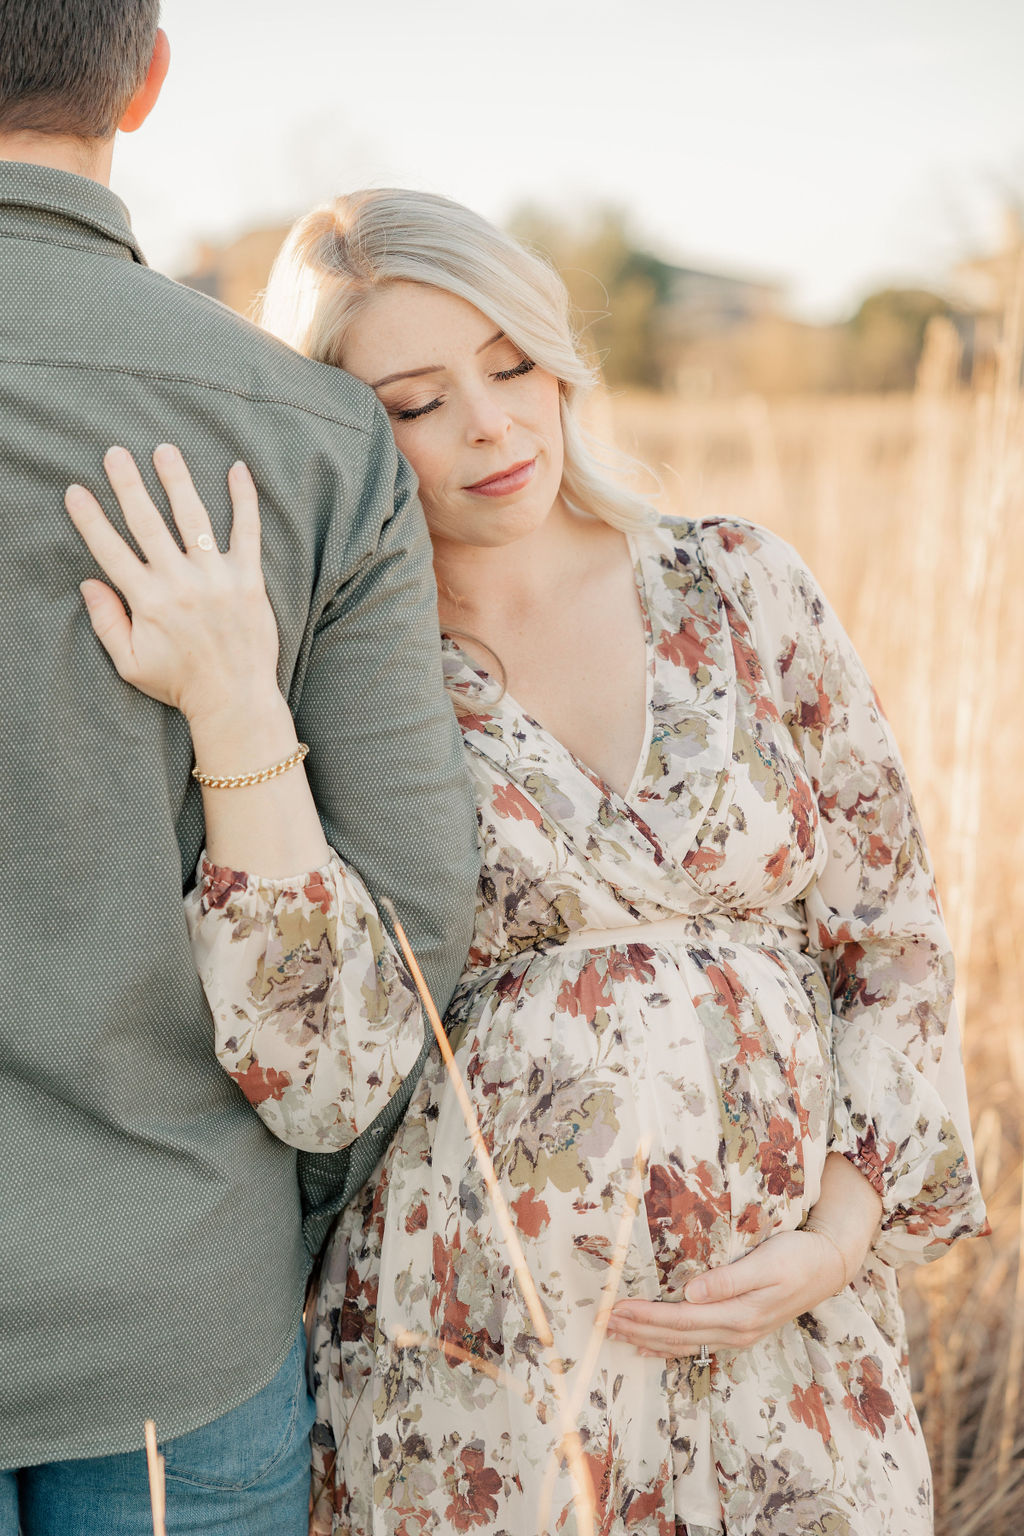 A mother-to-be in a floral pattern maternity gown leans onto her husband's shoulder in a golden field indianapolis prenatal massage